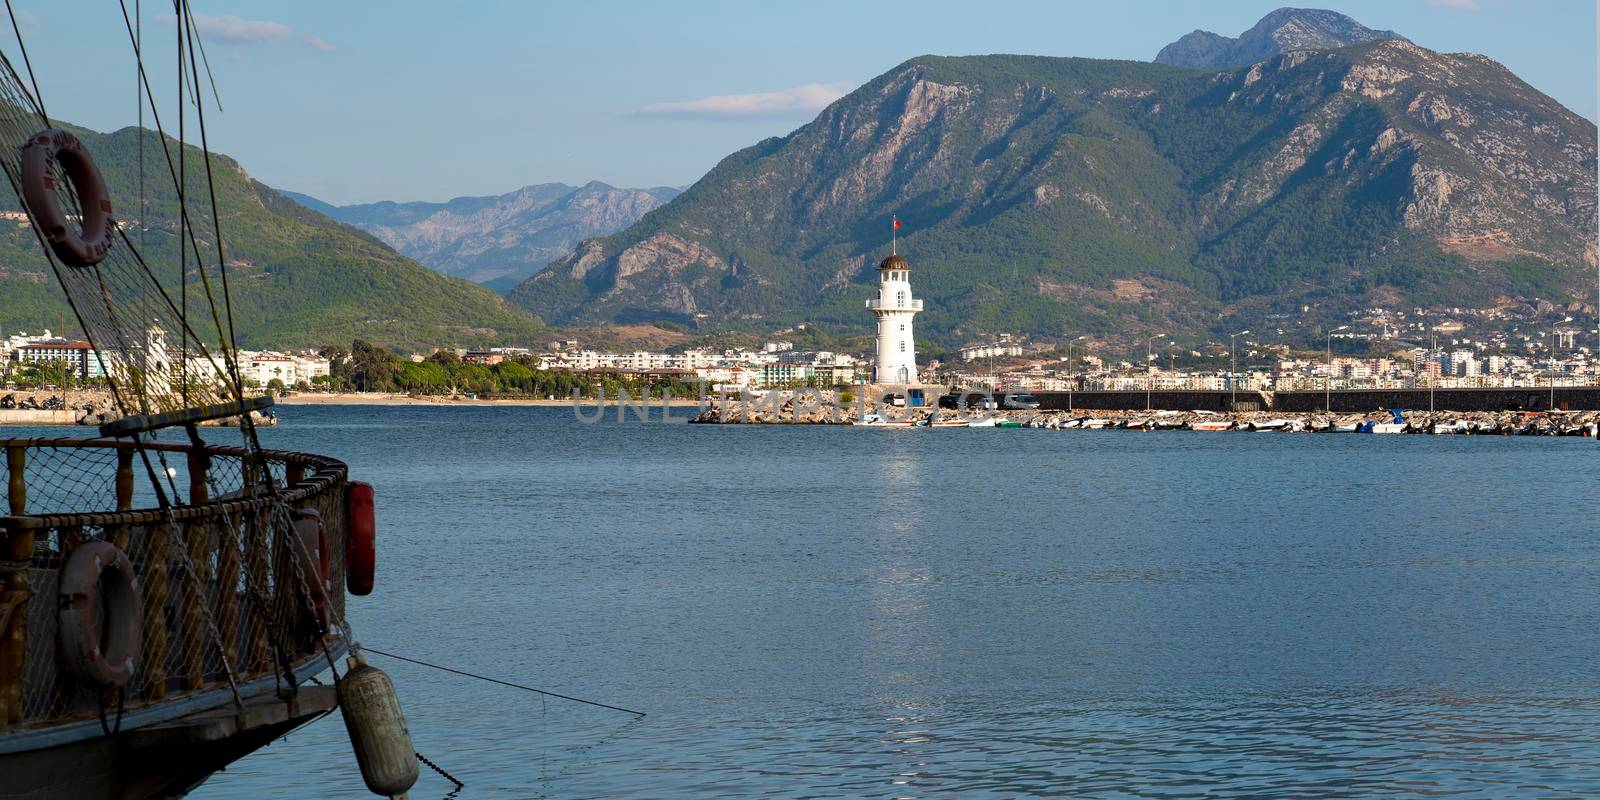 Turkey, Alanya - November 9, 2020: The coastline of Alanya. The old lighthouse in the port of Alanya. View from the sea.